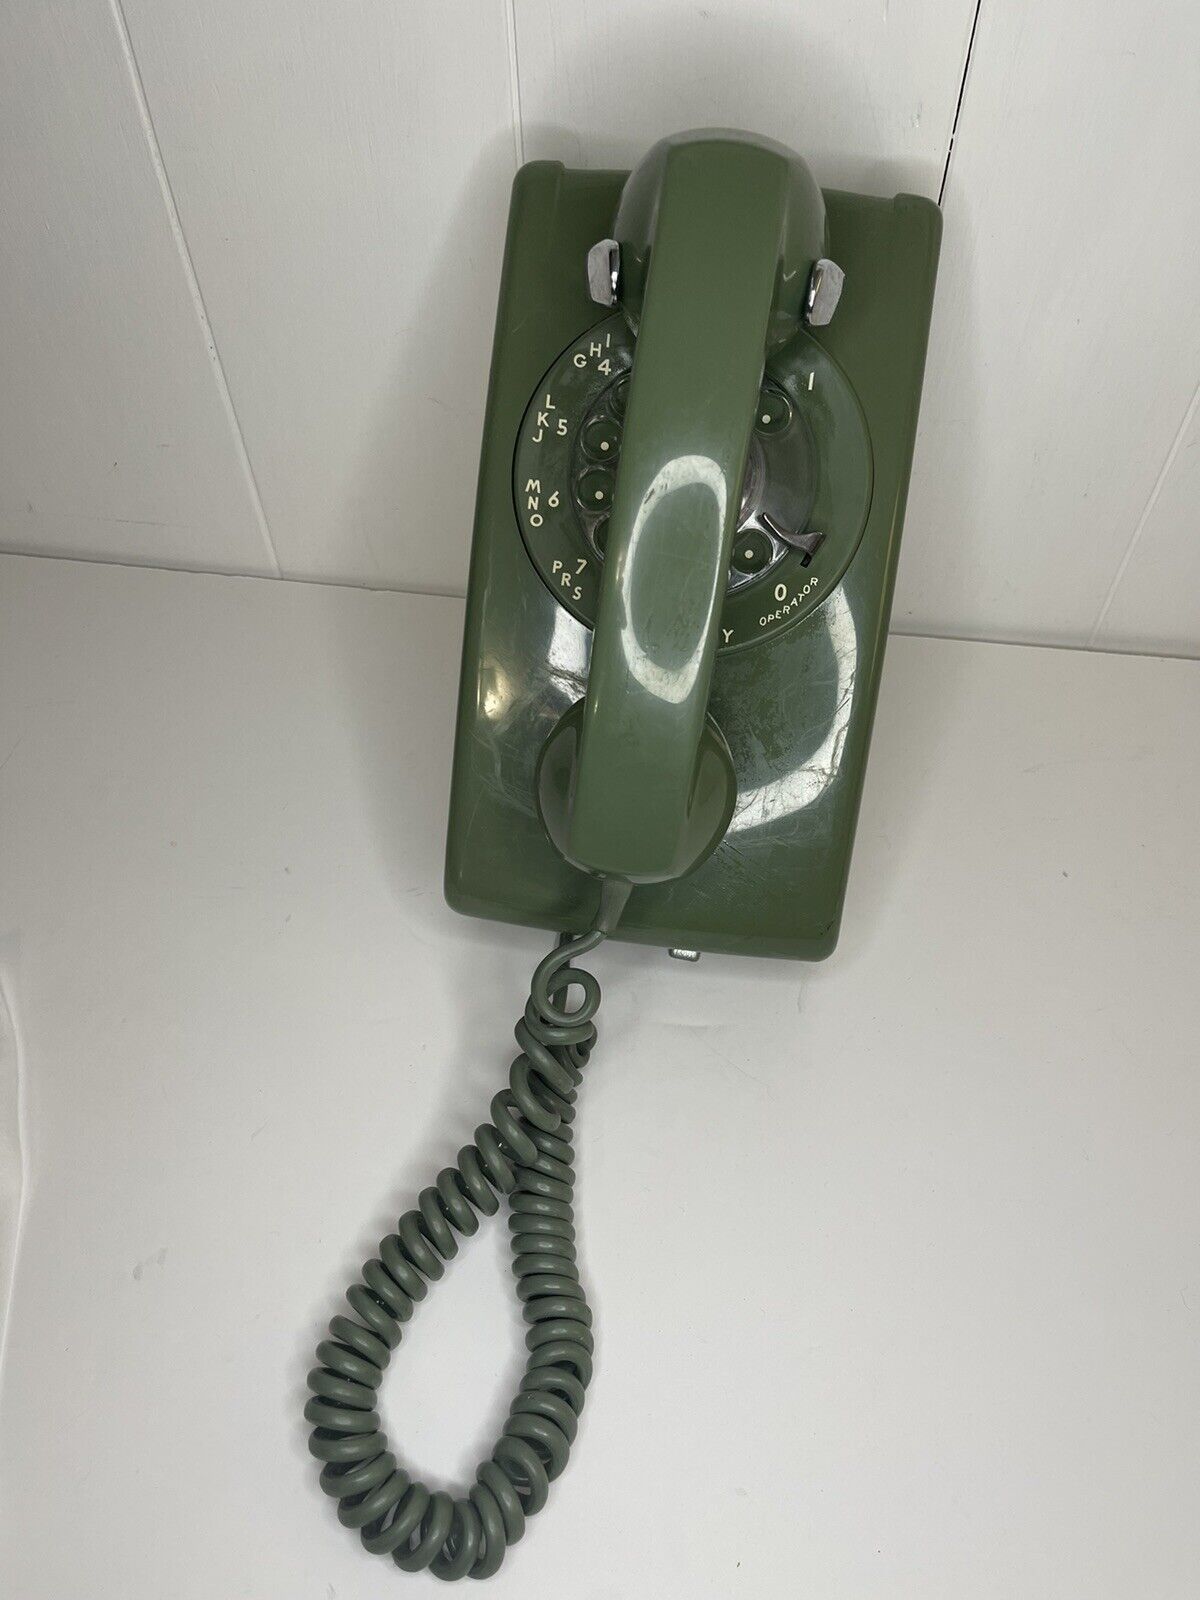 Vintage Western Electric Rotary Phone Wall Mount Avocado Green Not Tested